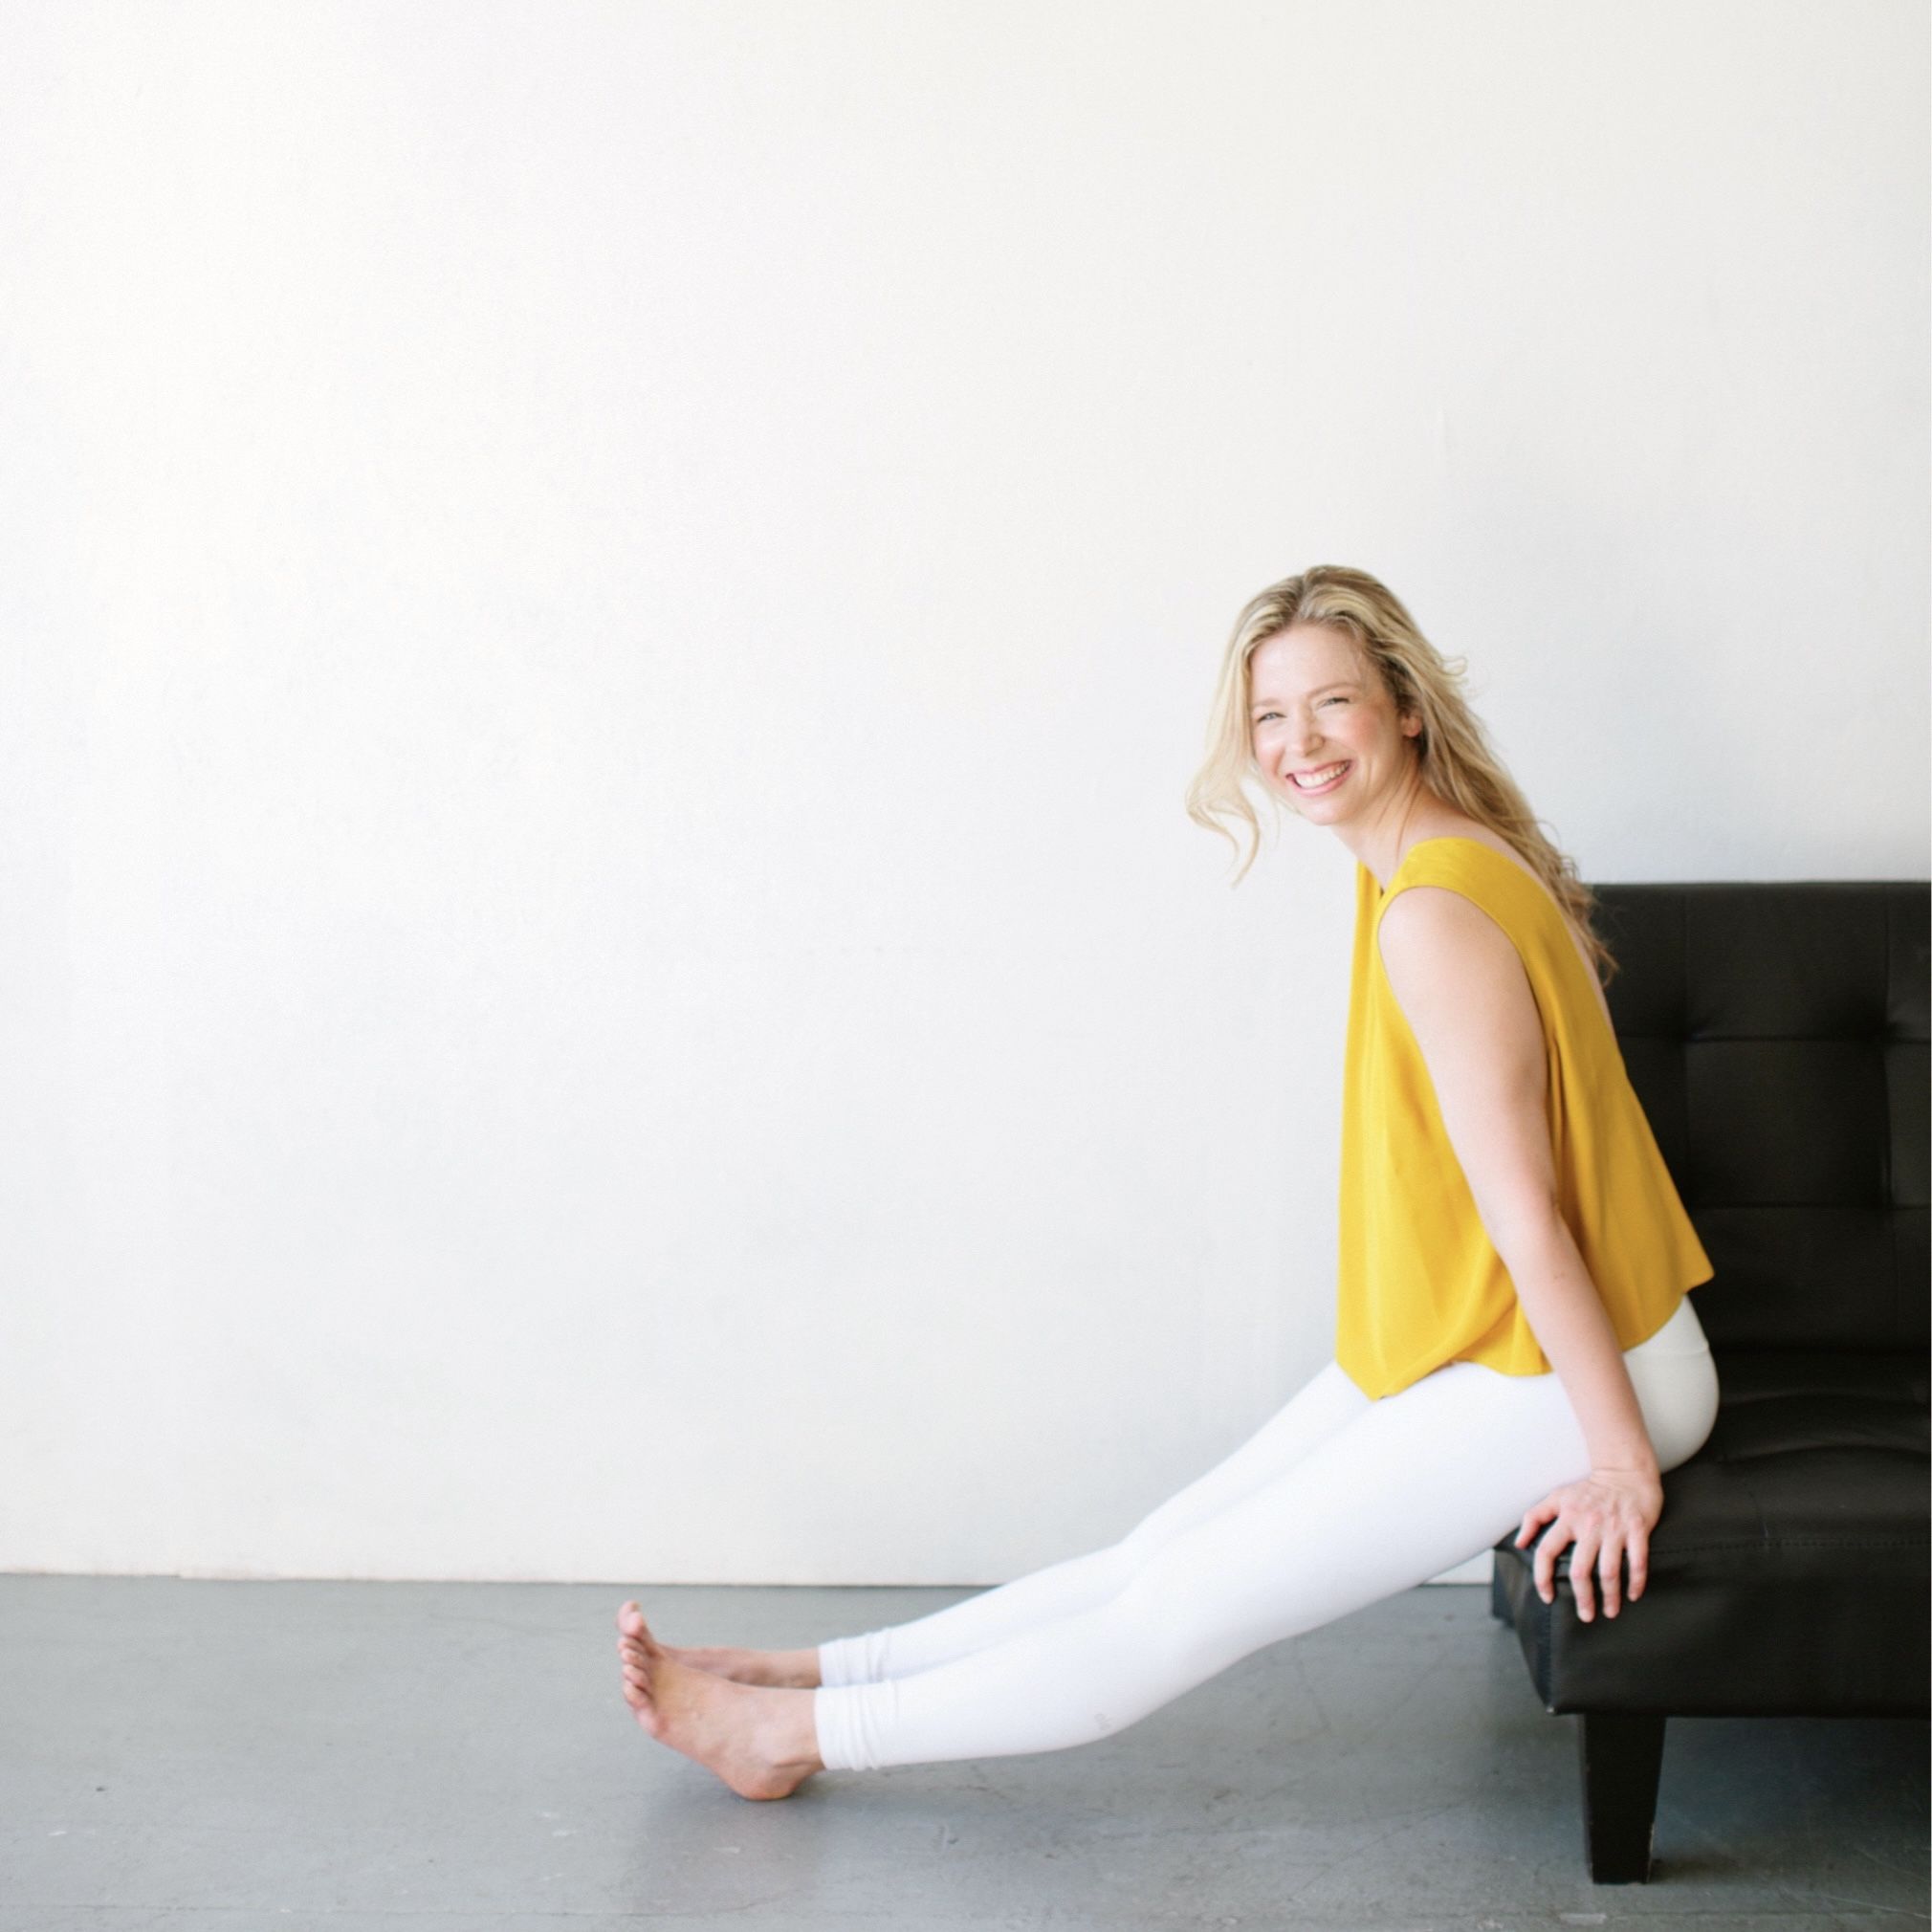 woman in yellow shirt and white pants sitting on black leather couch smiling at camera, white wall, grey floor